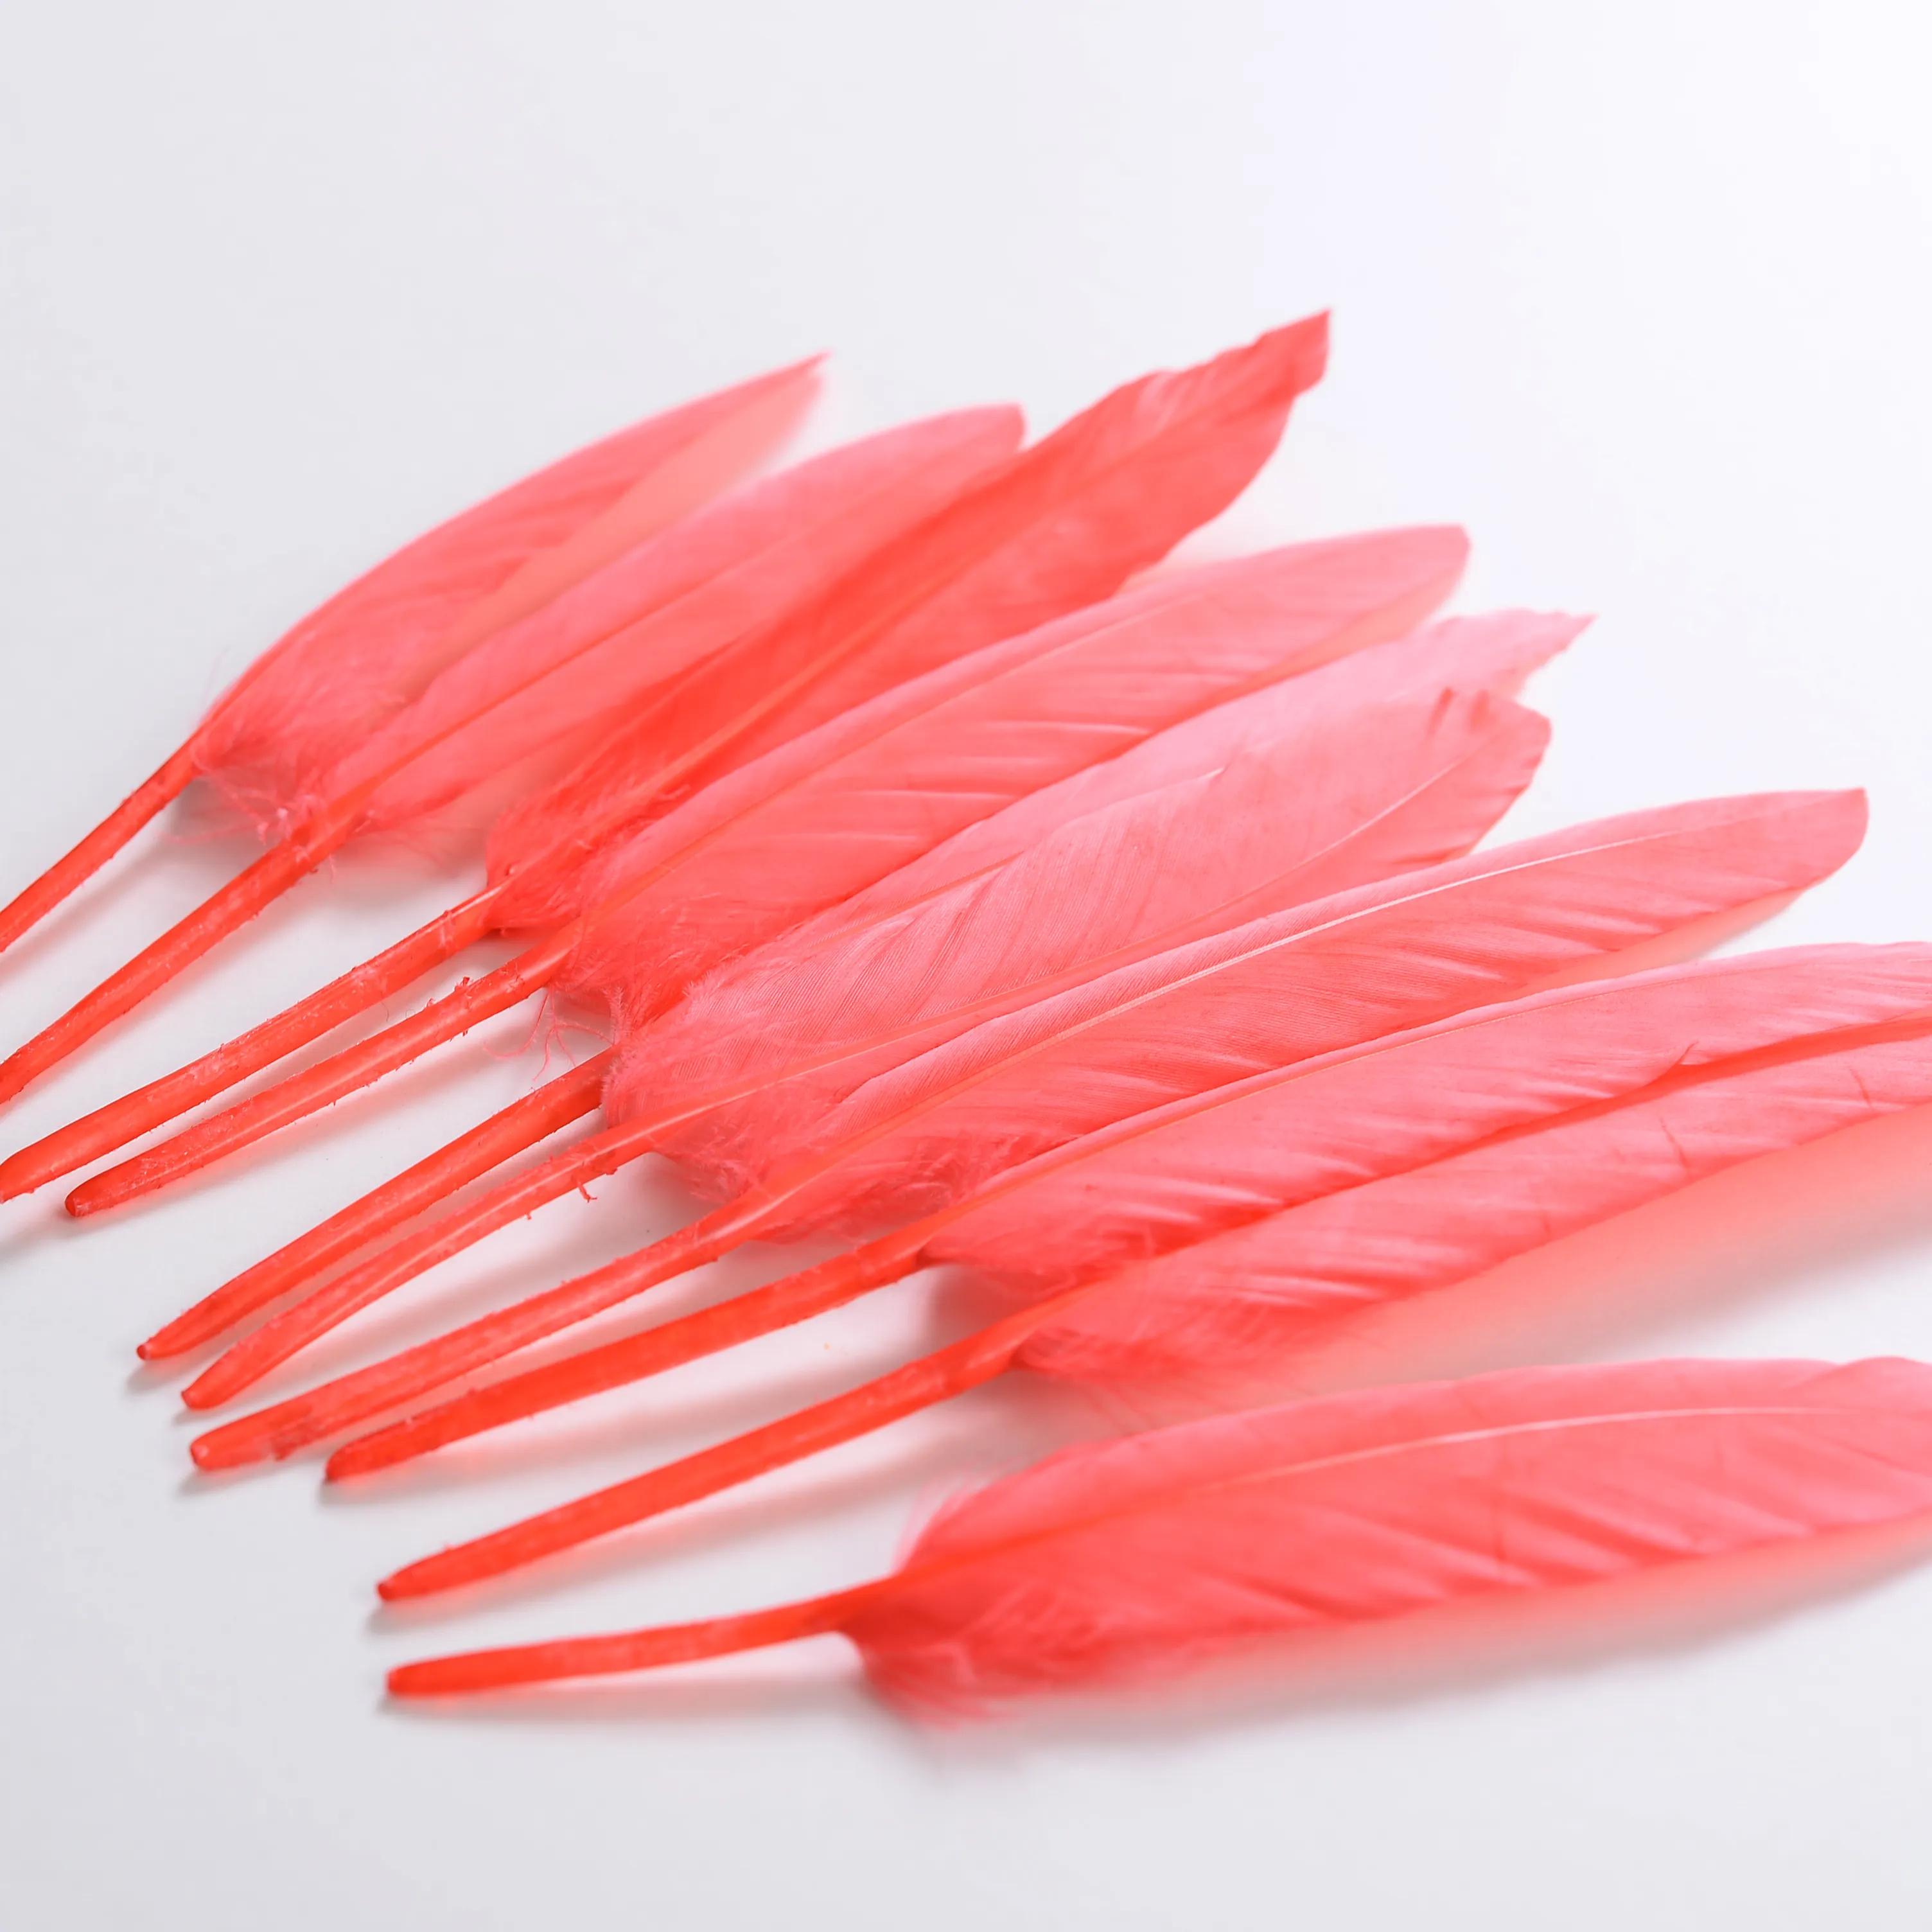 4-6 Inch 10-15 cm 12pcs per pack Wholesale DIY tip gold Tipped Goose Feathers With Crimp hat for gifts package